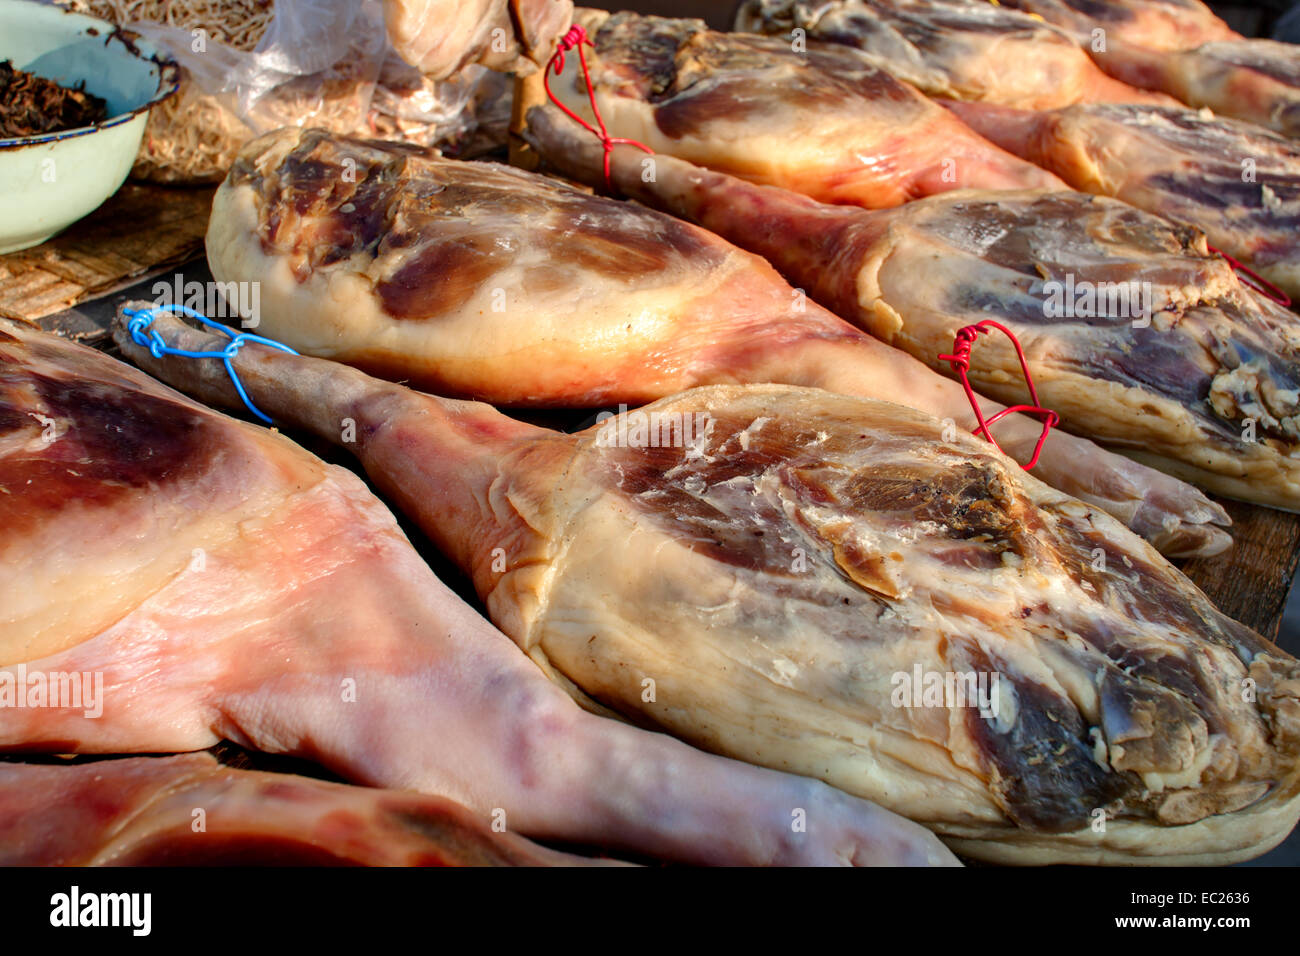 Cured meat, people make meat dried and cured to keep long time in south area of China. Stock Photo